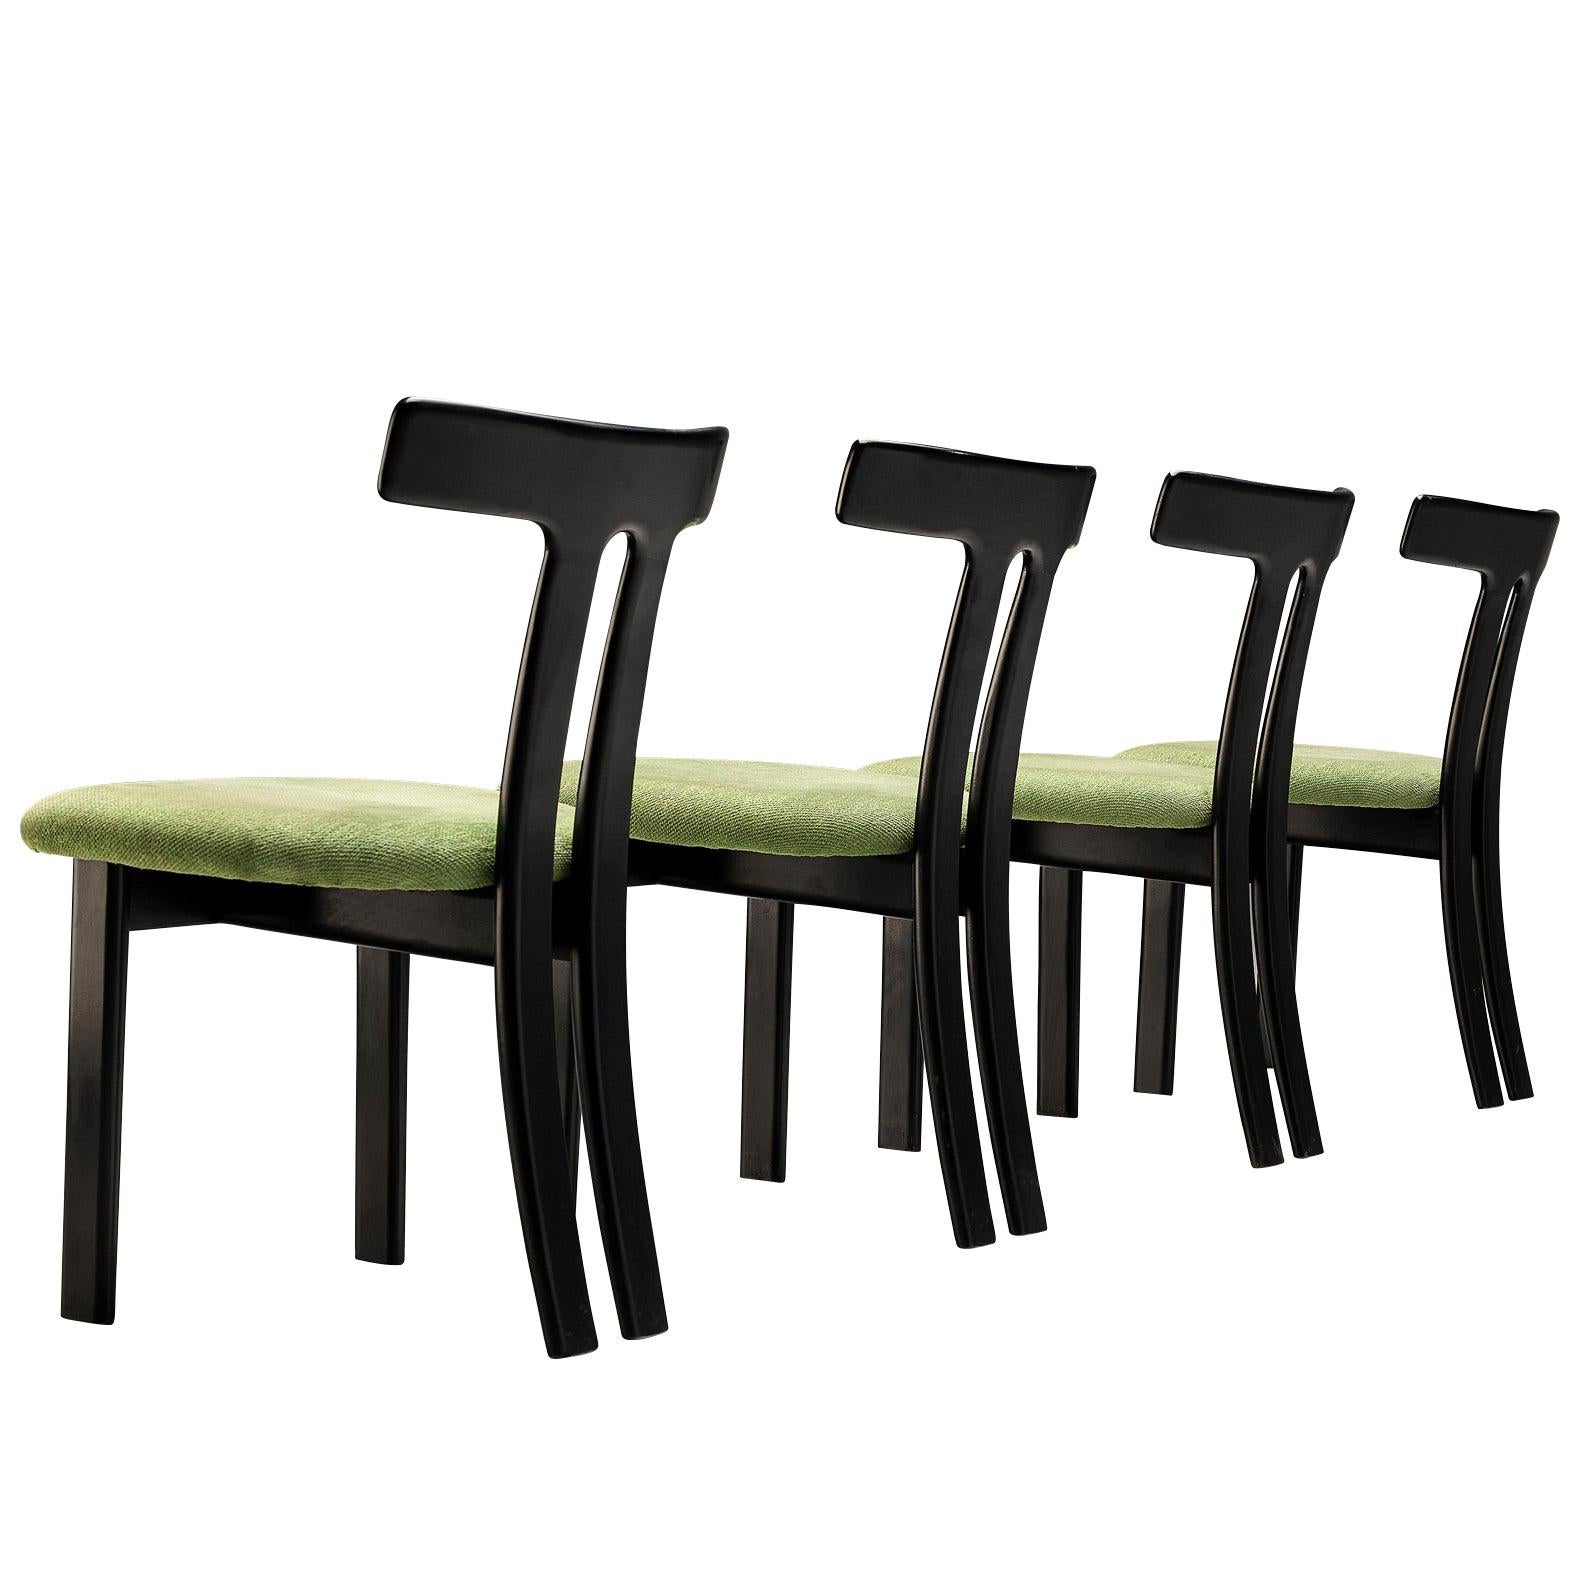 Set of 4 Danish Dining Chairs in Black Lacquered Frames and Green Seats